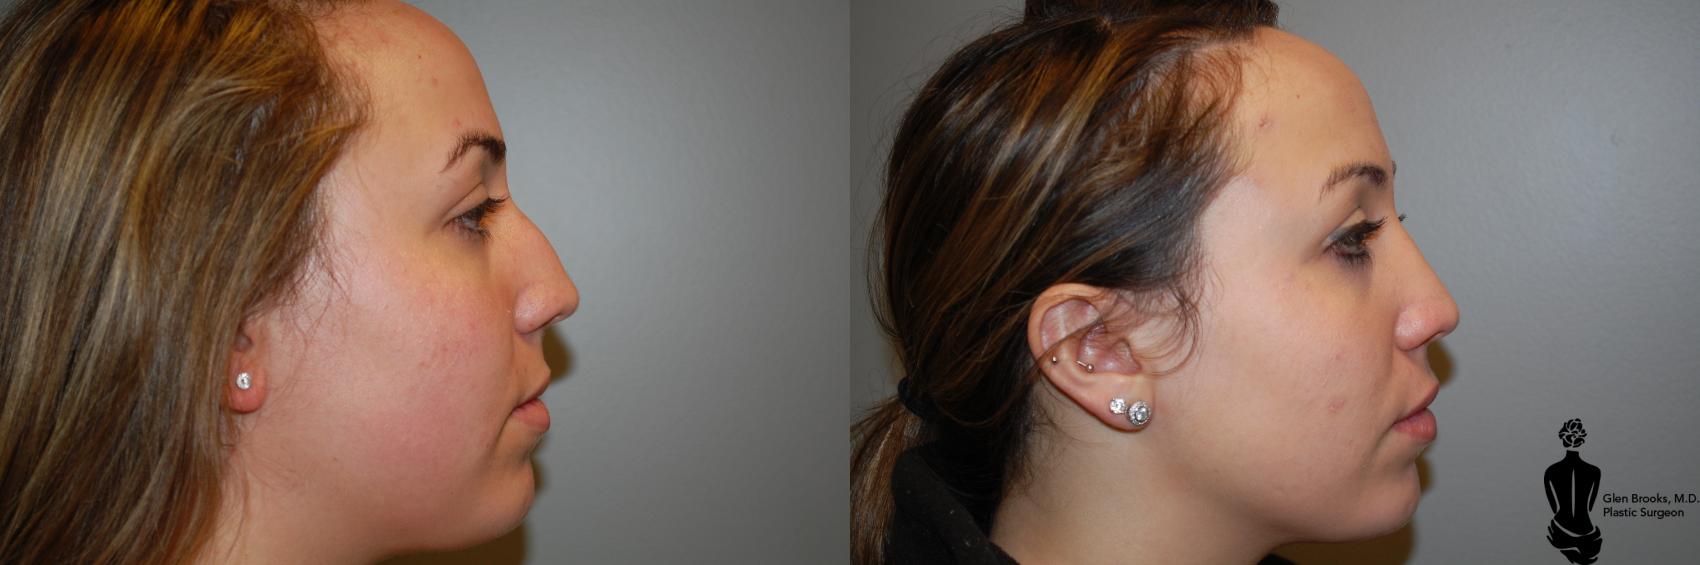 Rhinoplasty Before & After Photo | Springfield, MA | Aesthetic Plastic & Reconstructive Surgery